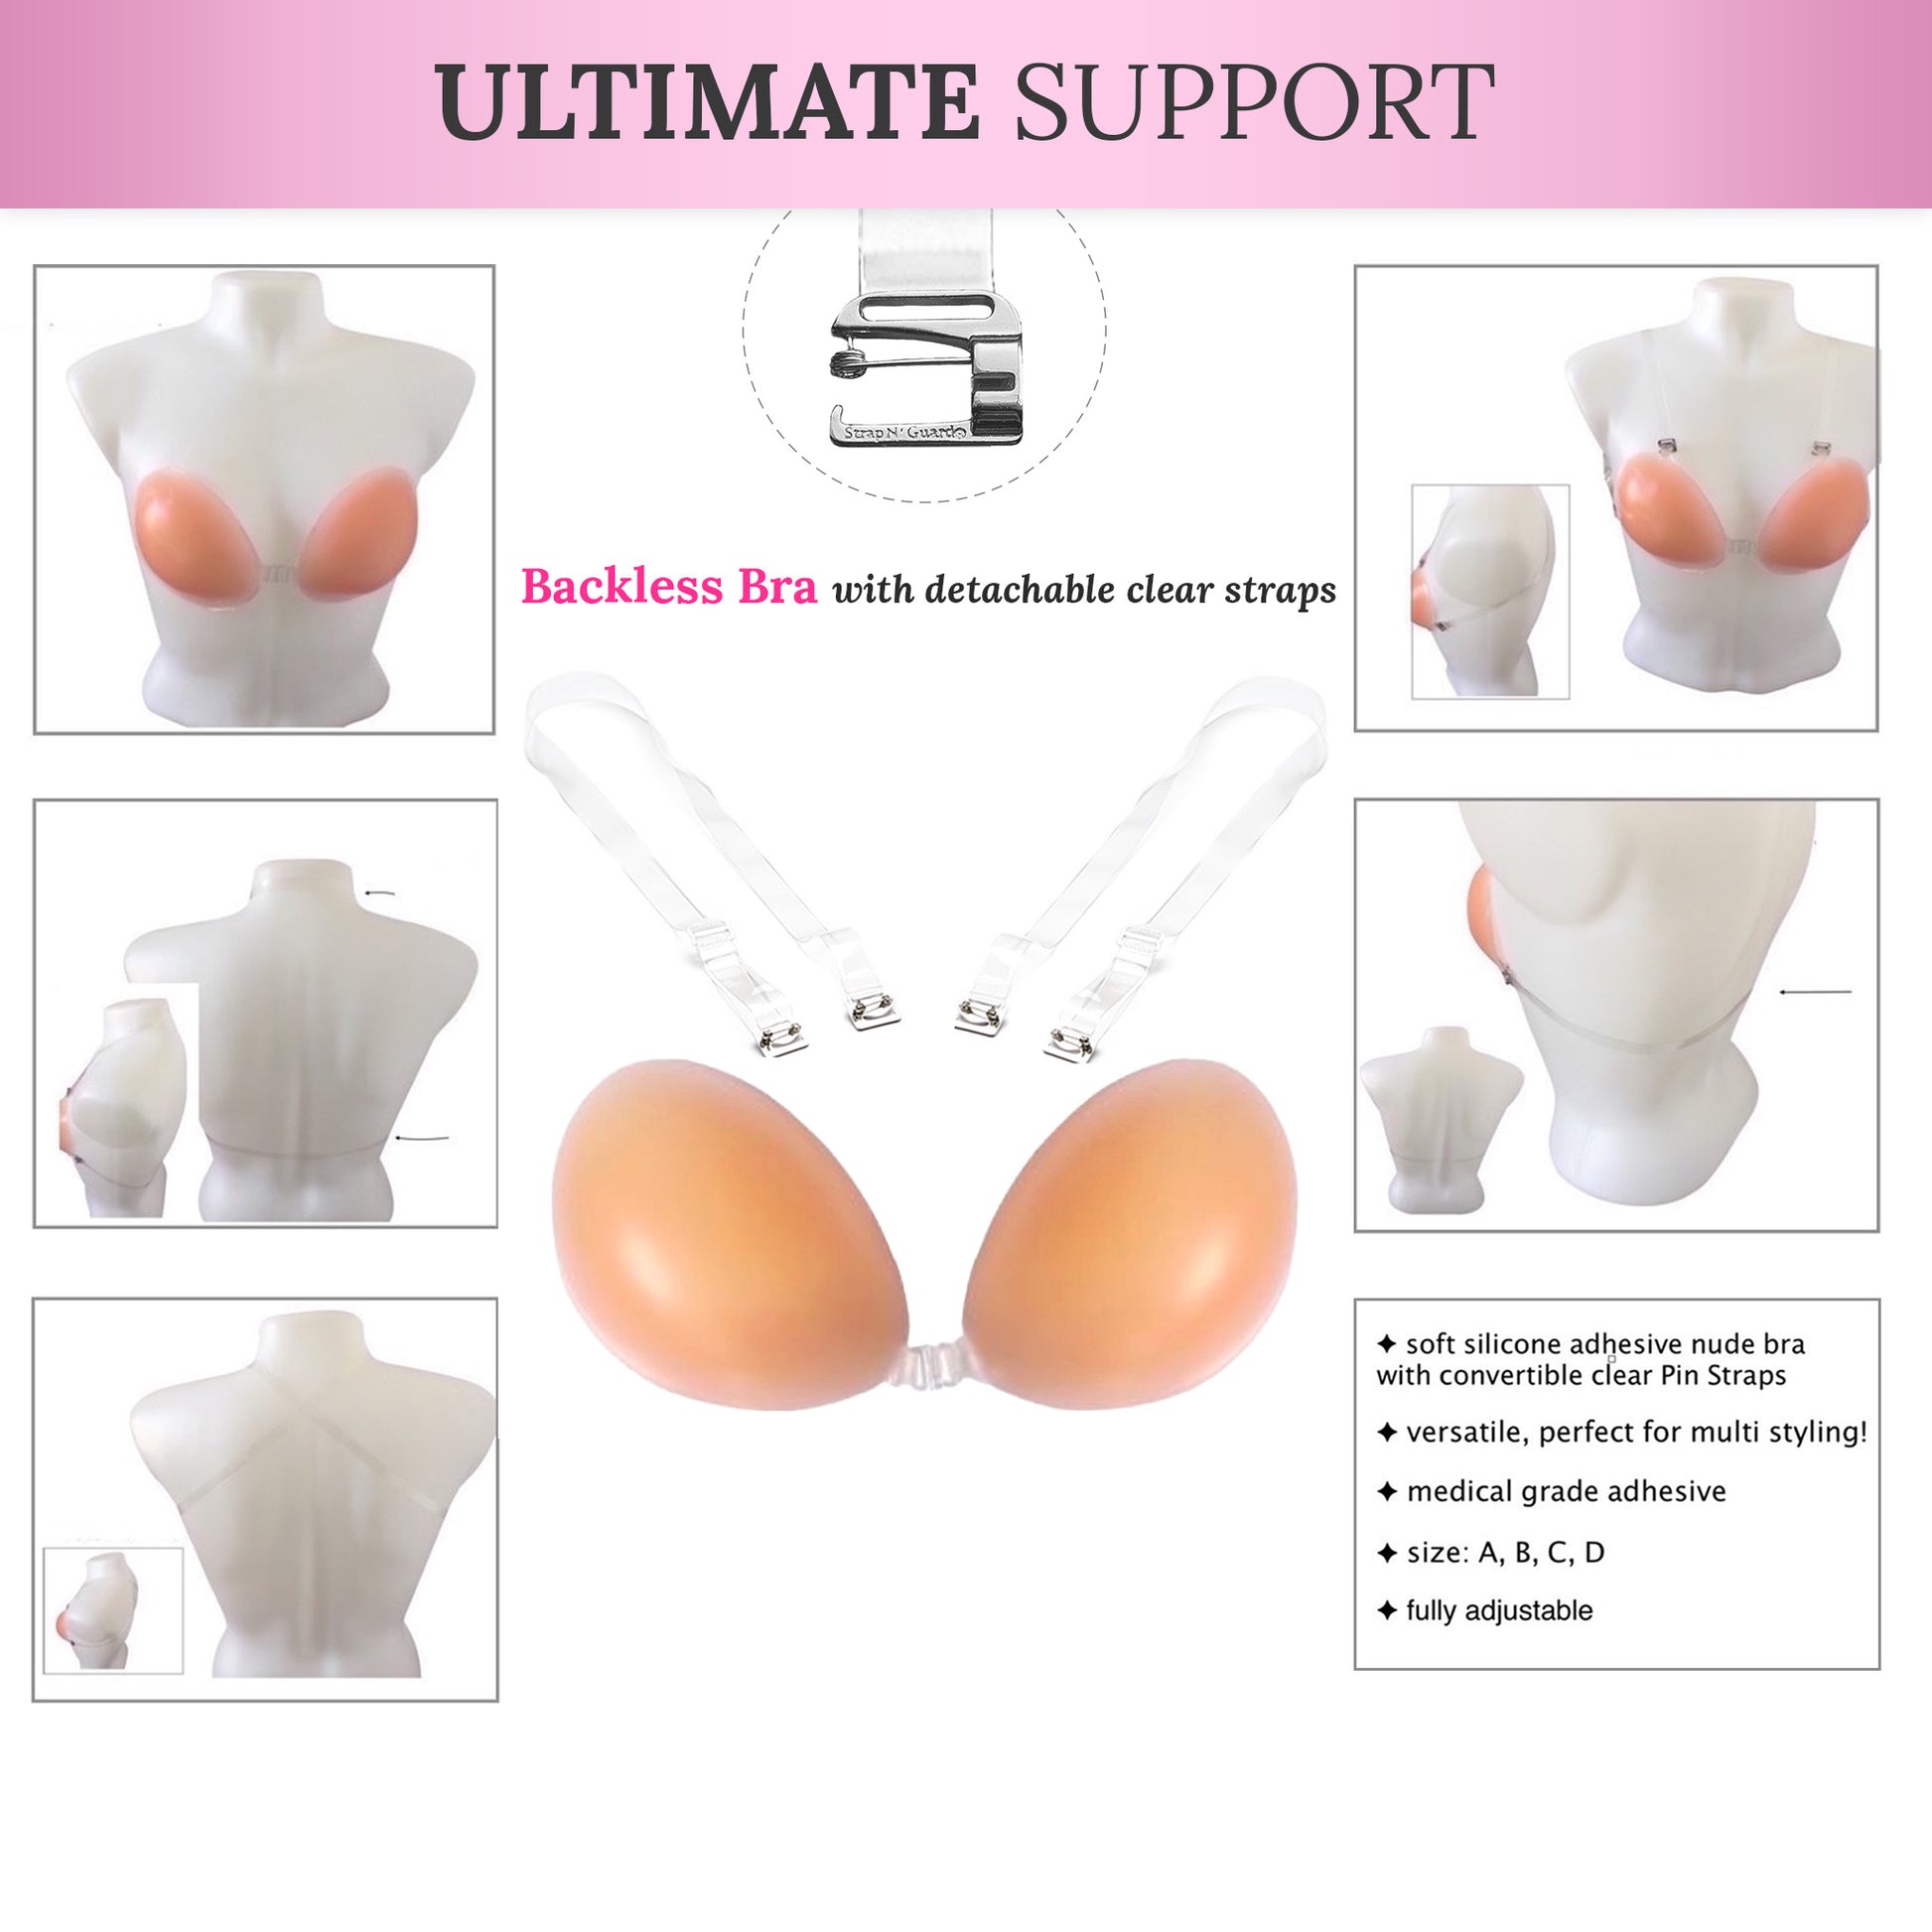 Backless Adhesive Bra (Nude) with Detachable Clear Bra Straps